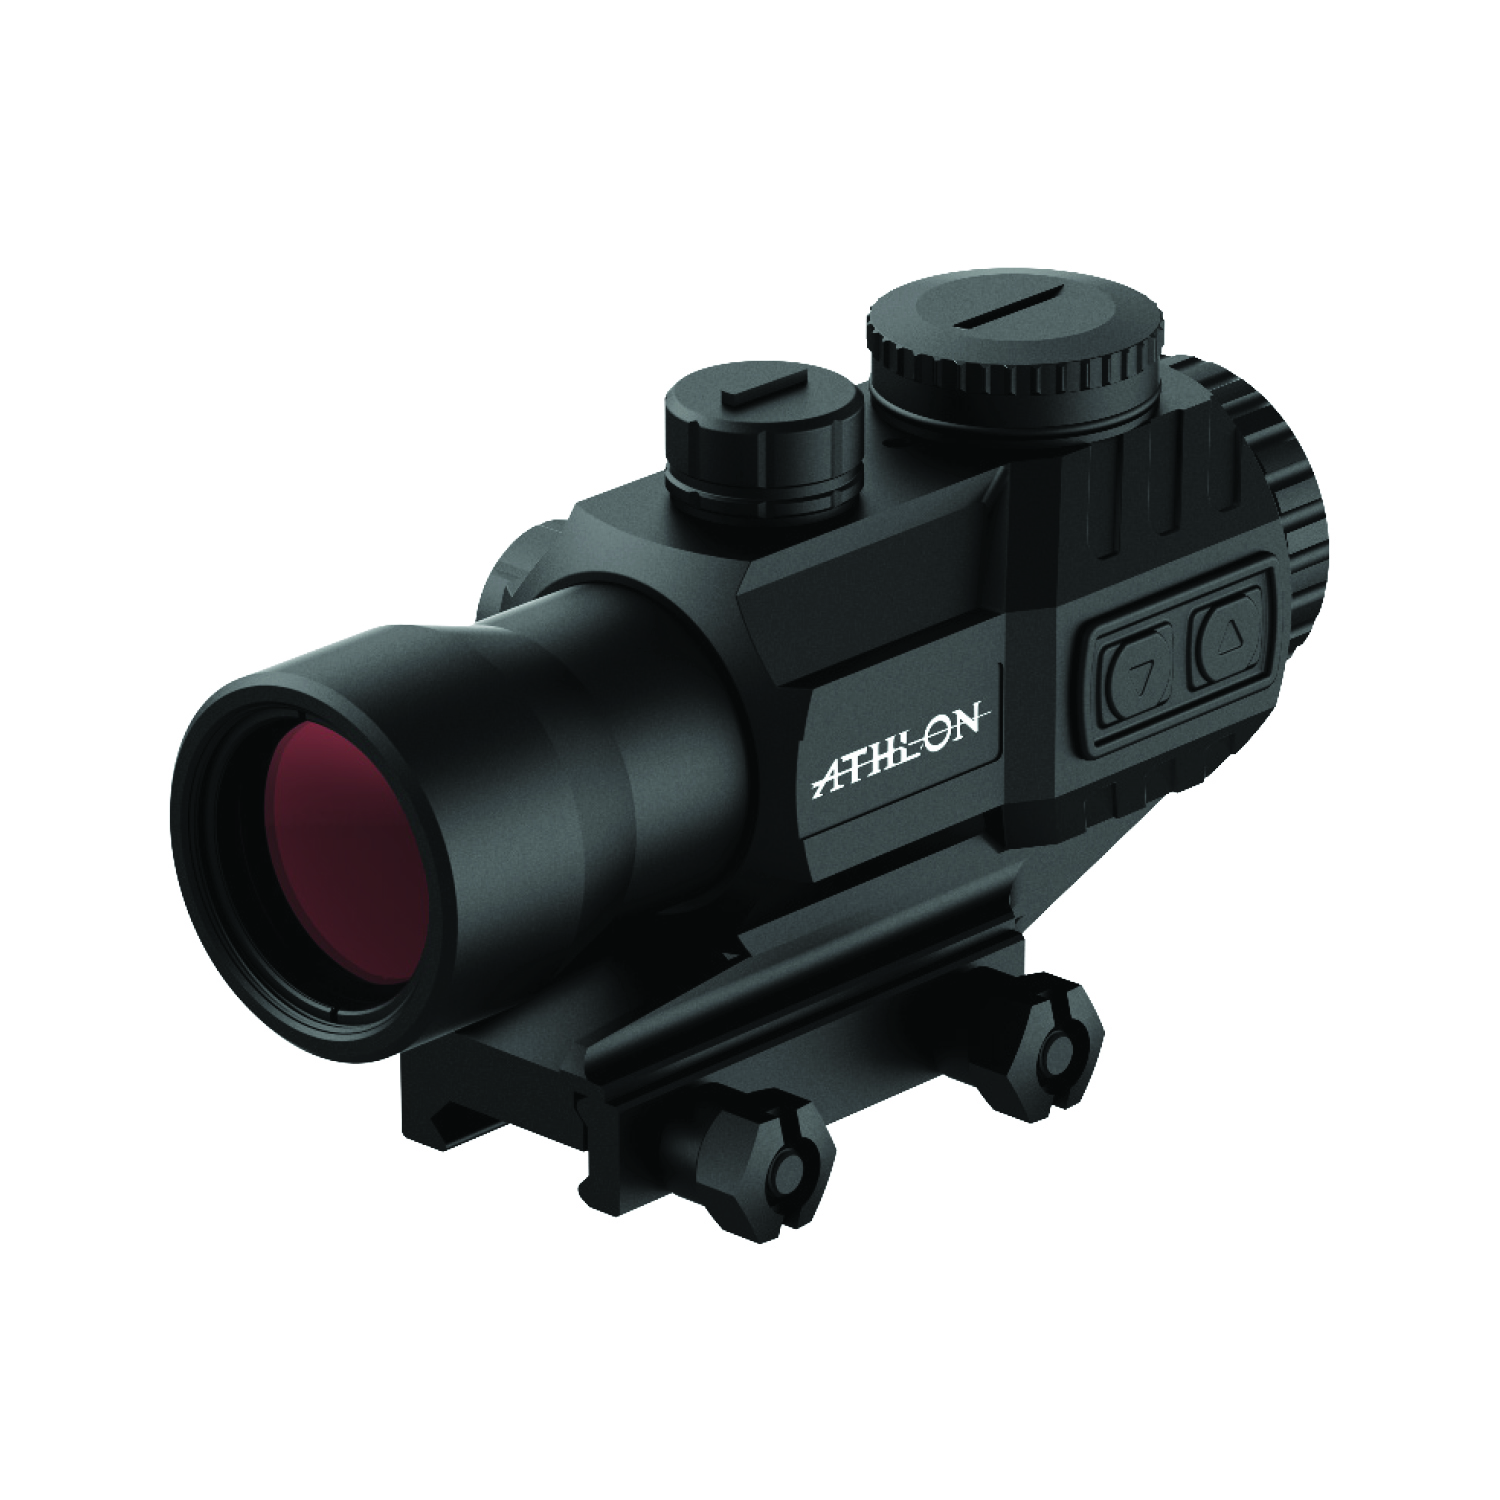 DISCONTINUED PRISM SCOPES